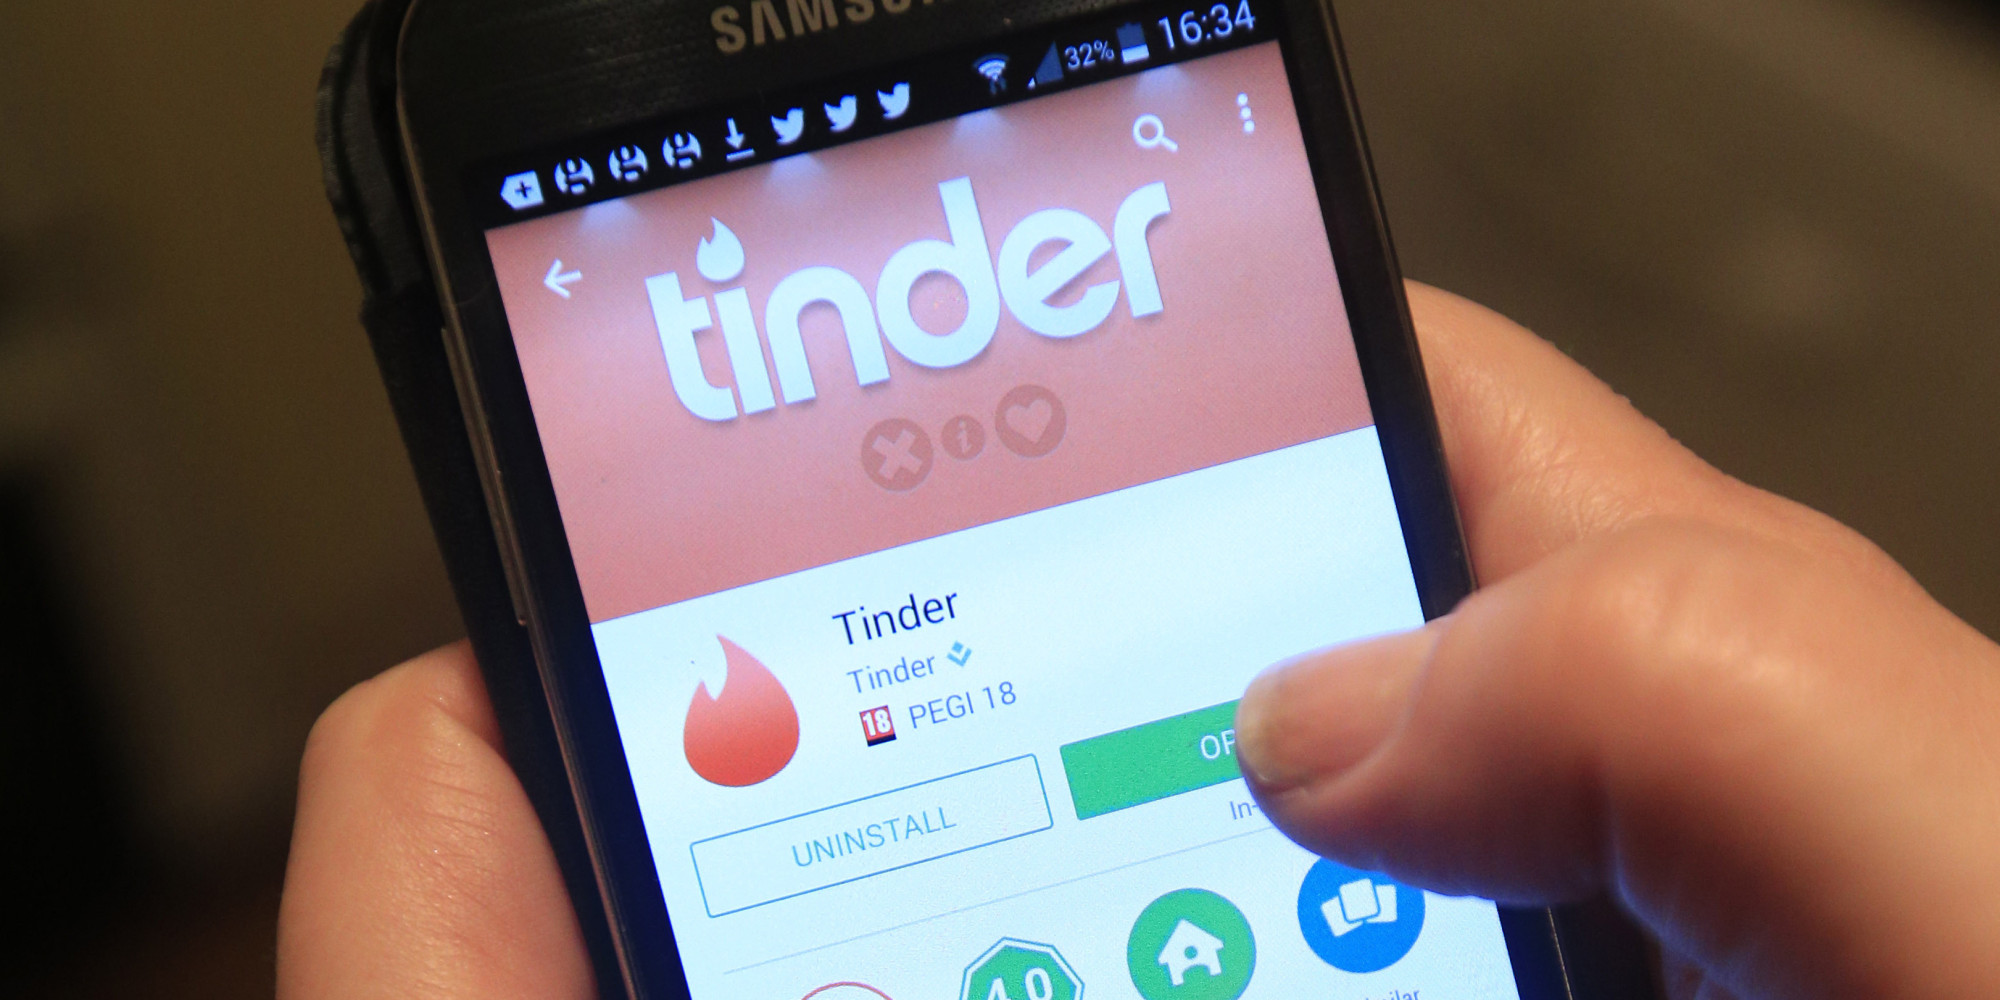 Crimes Linked To Tinder And Grindr Jump Sevenfold In Two Years With